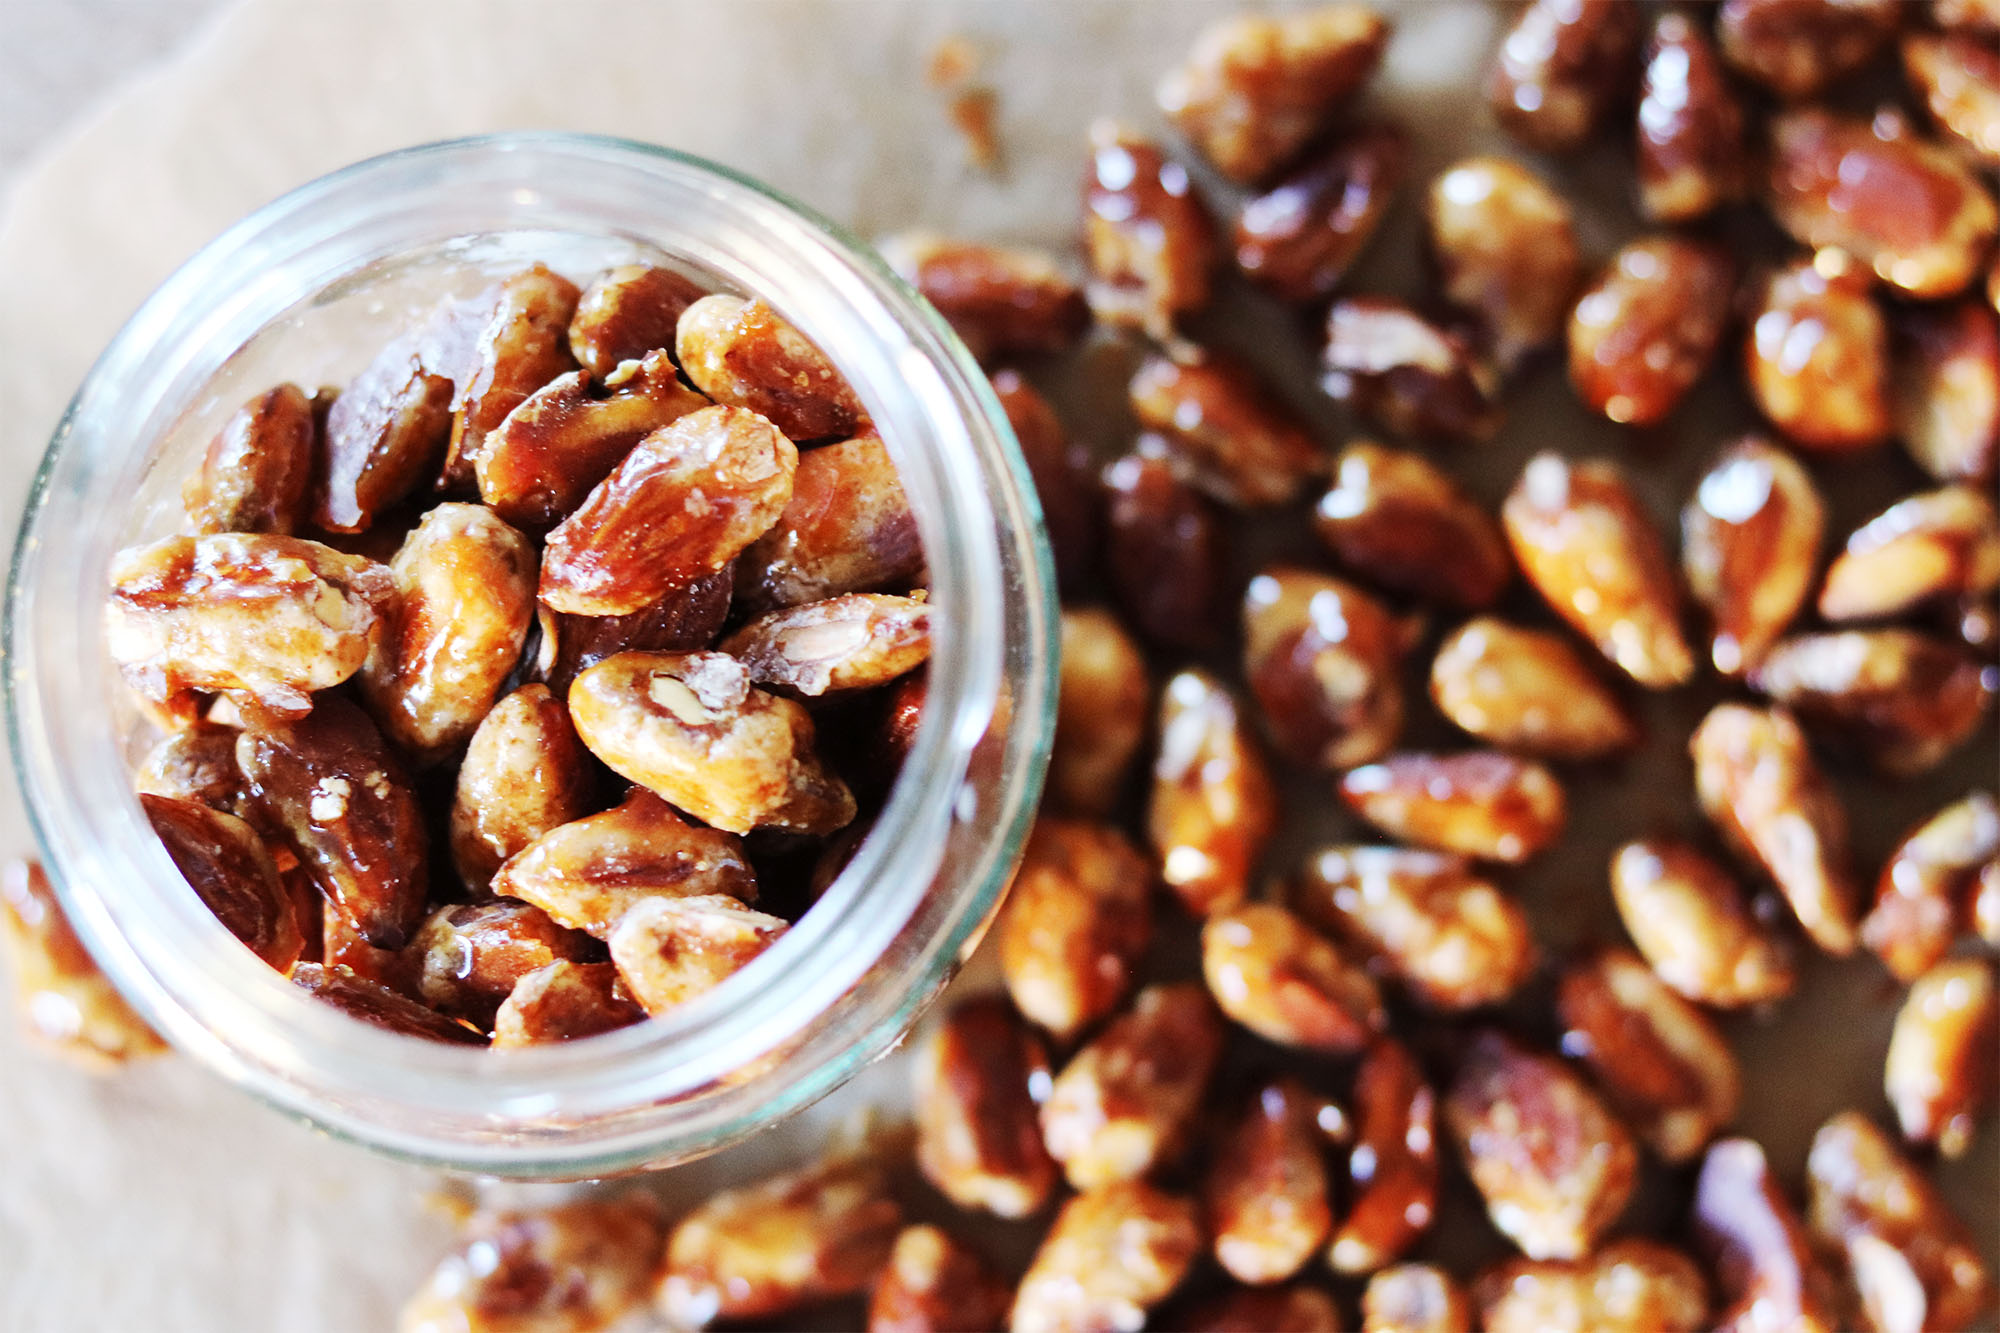 Candied Almonds recipe, Christmas in Denmark